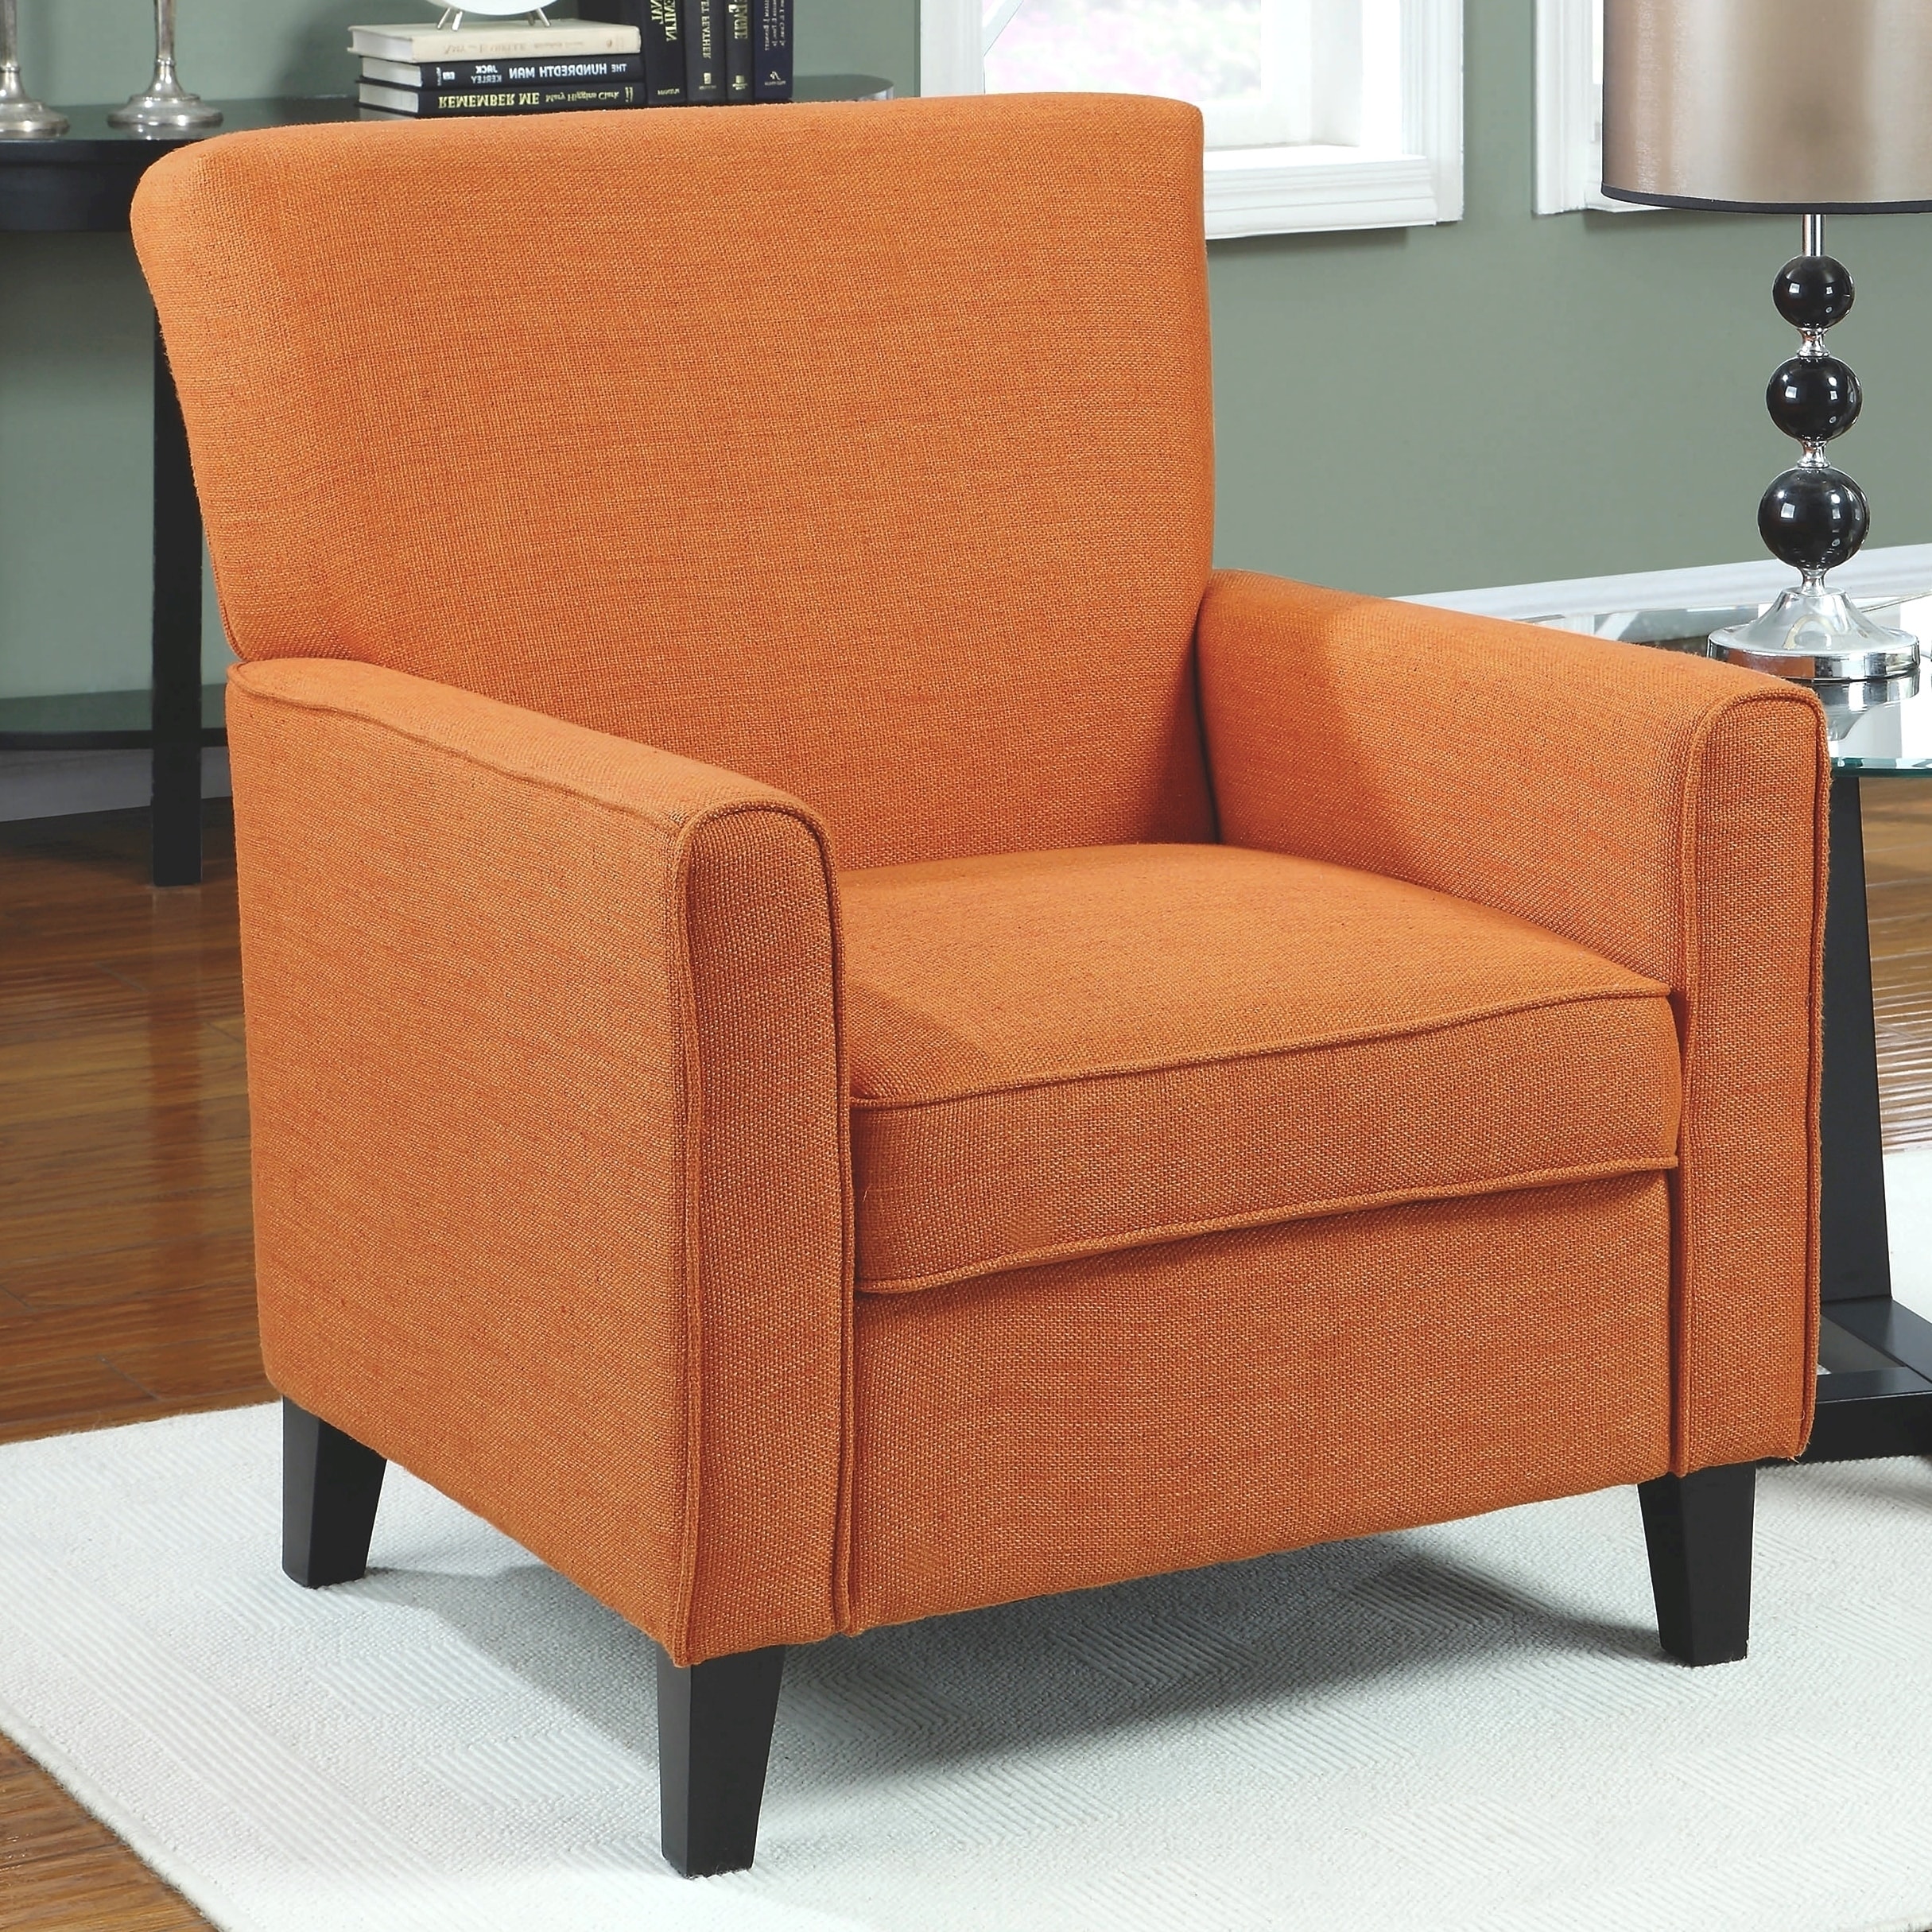 Contemporary Design Orange Upholstered Living Room Accent Chair 764e5b06 3f2f 4649 A164 62f02b0ab6b9 